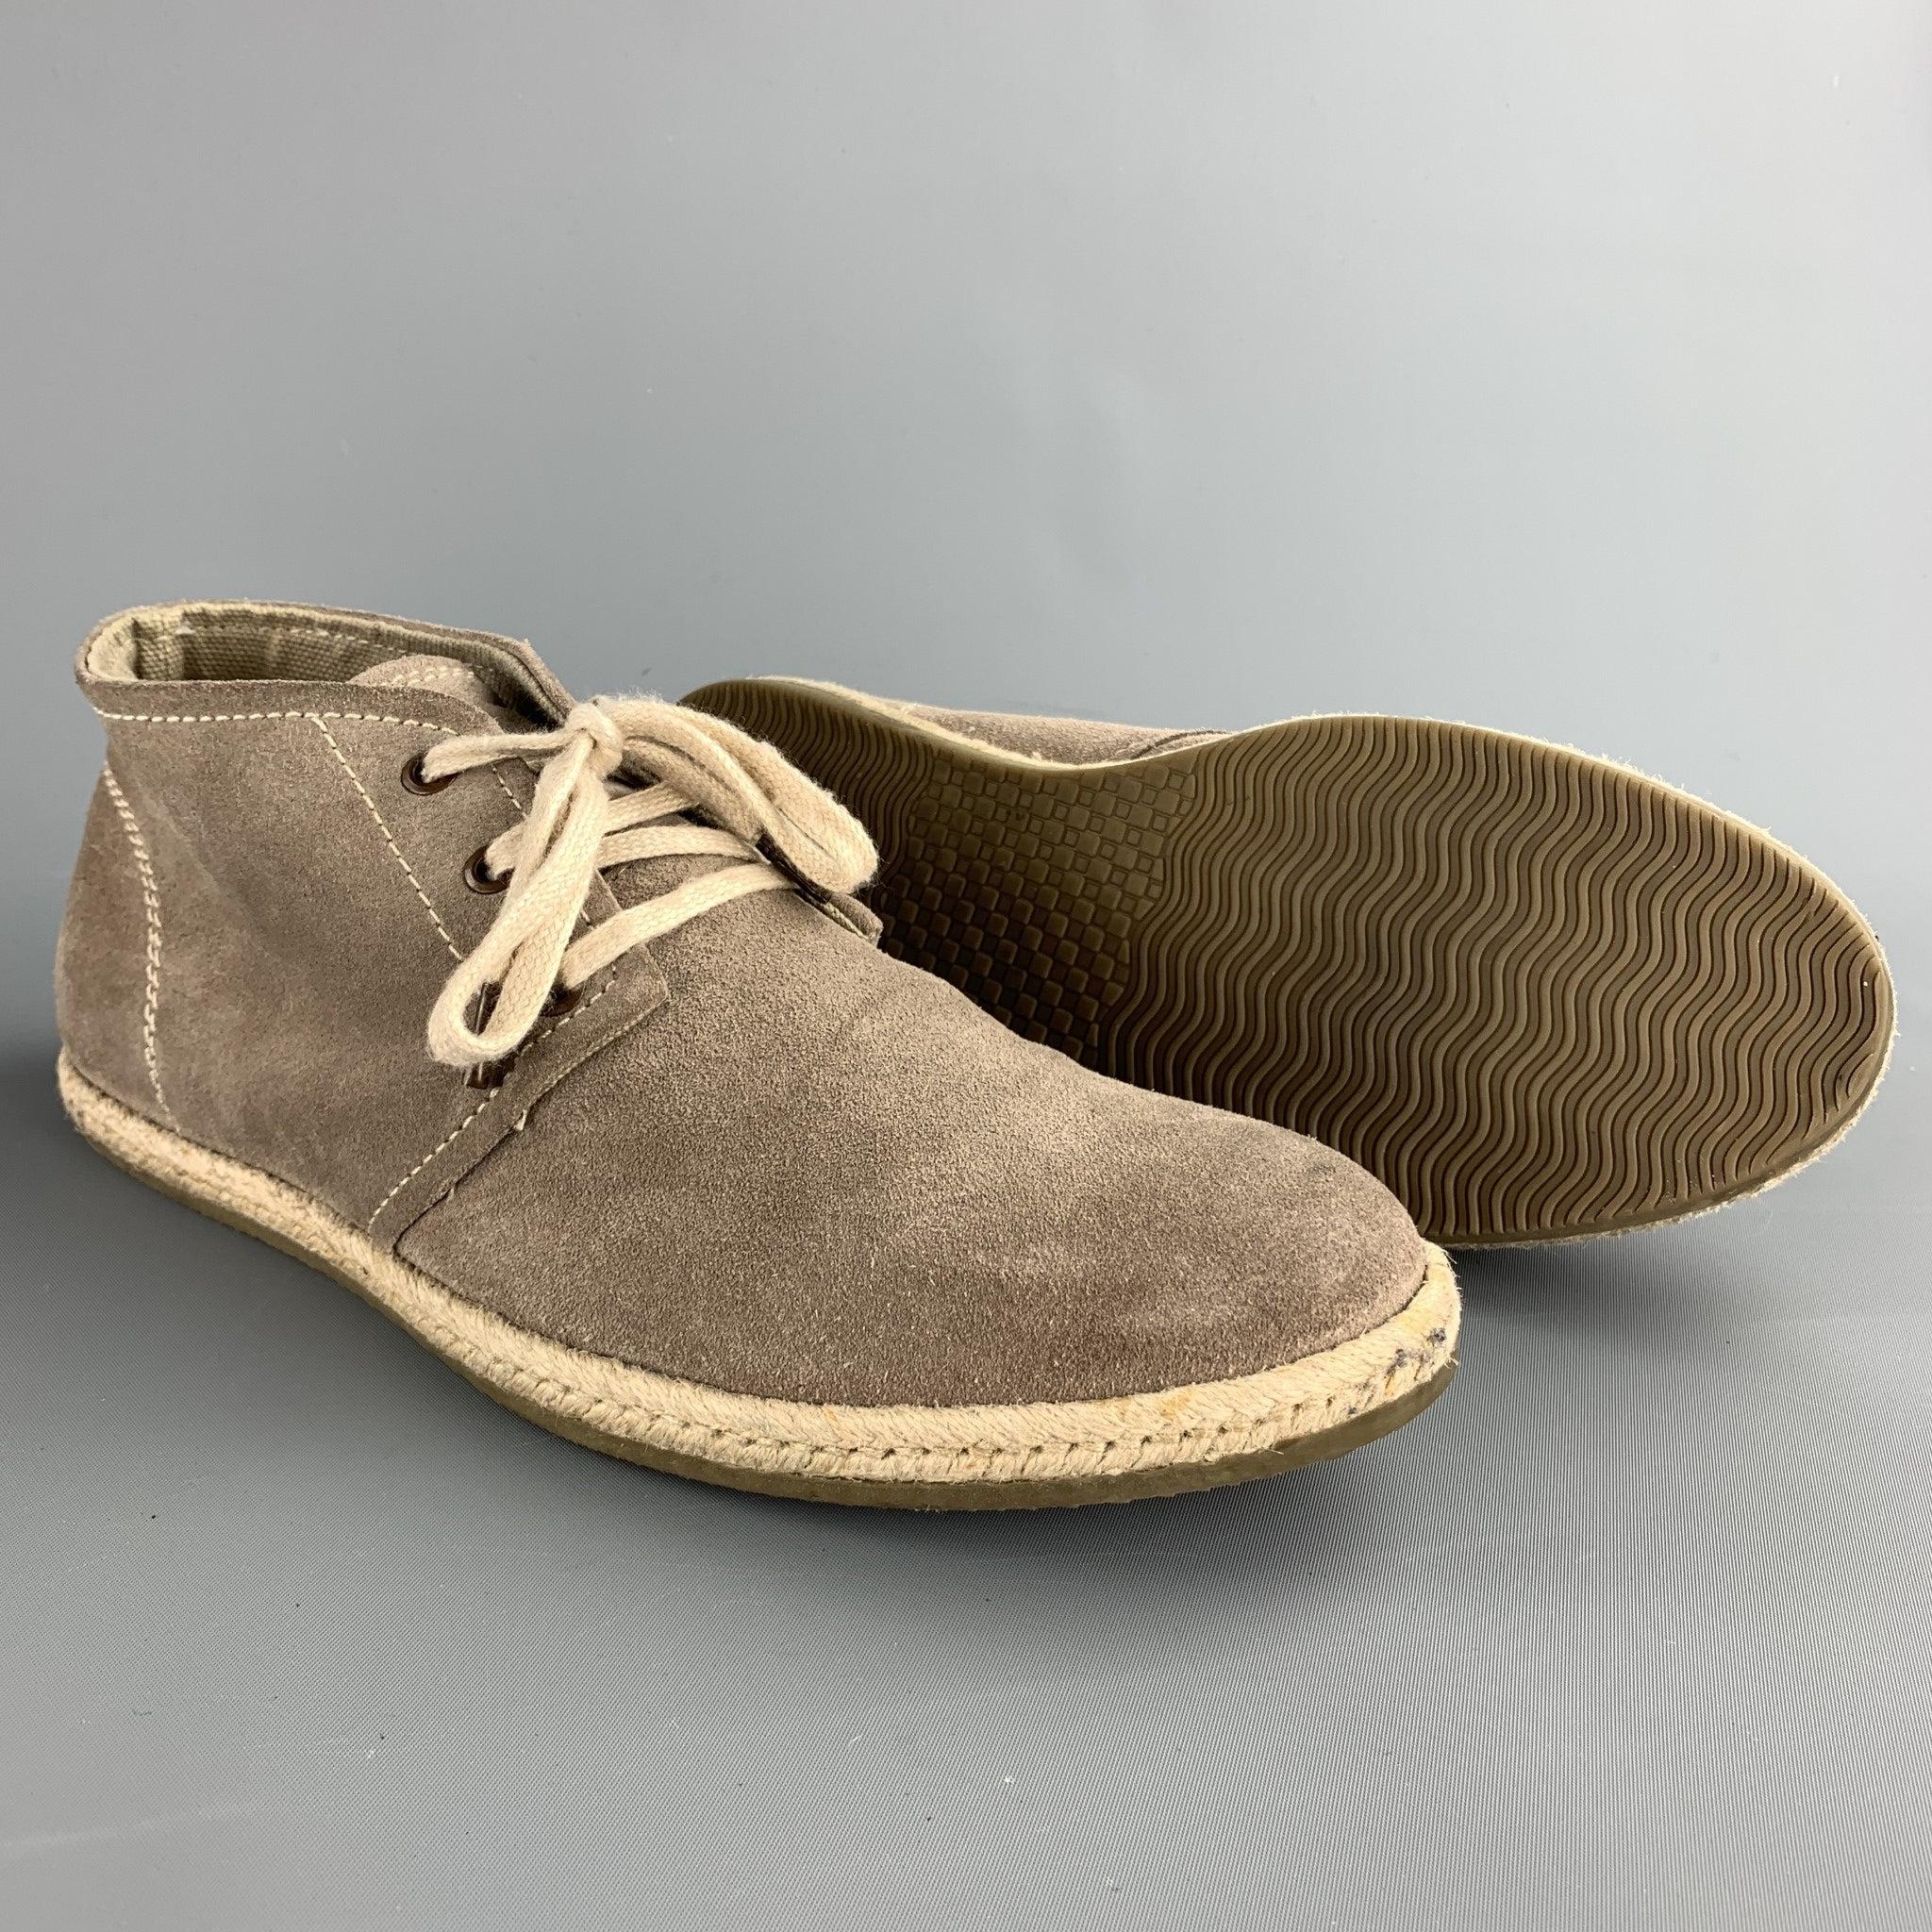 ALLSAINTS SPITALFIELDS Size 8 Taupe Suede Lace Up Chukka Boots In Good Condition For Sale In San Francisco, CA